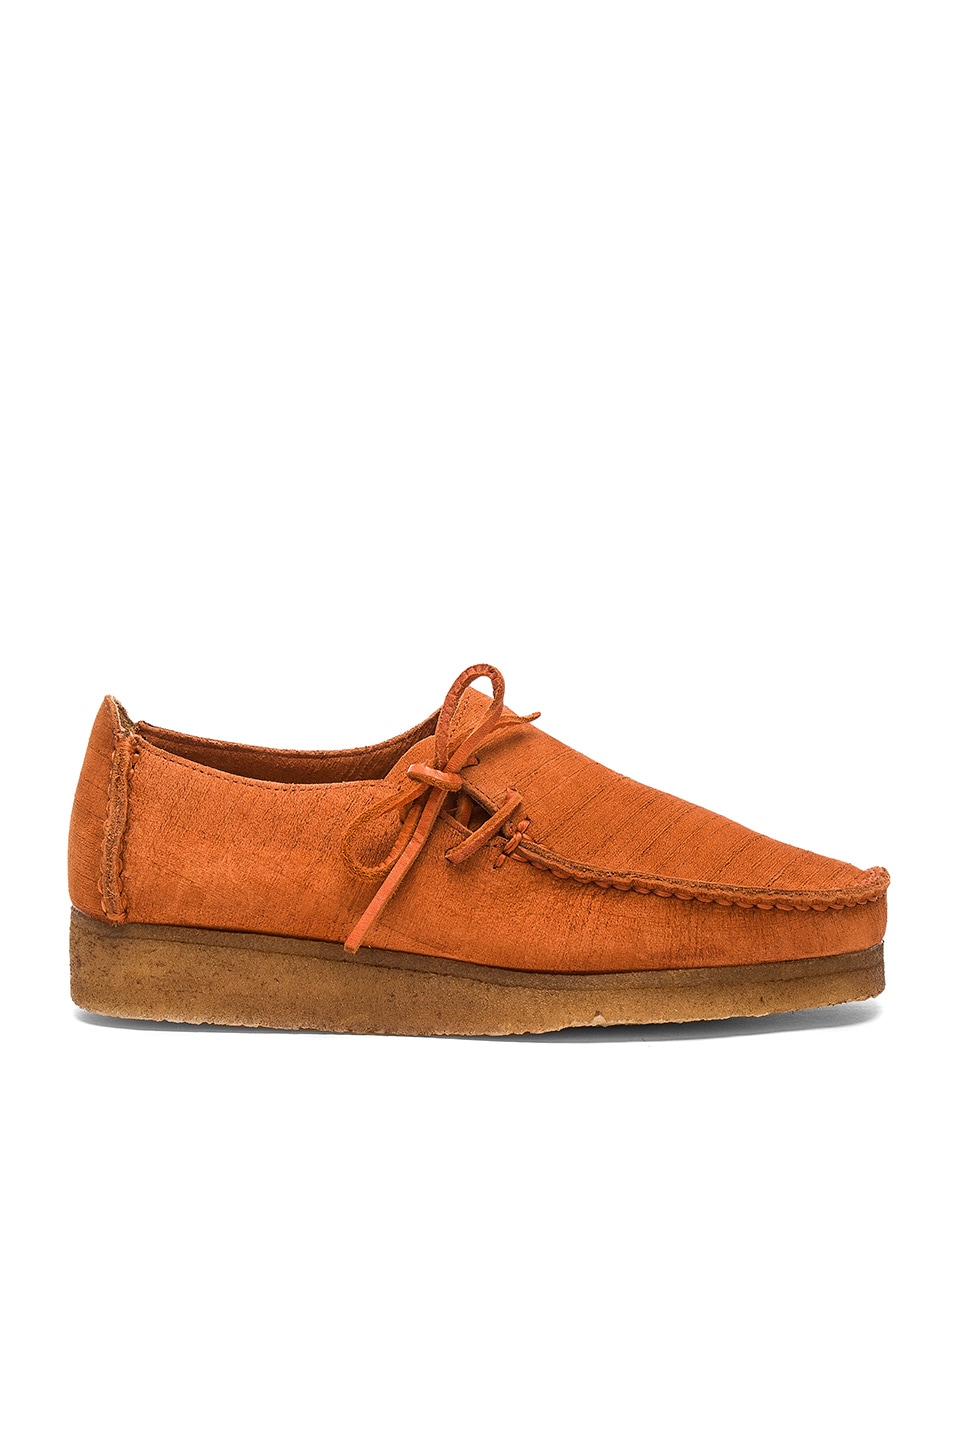 clarks lugger womens